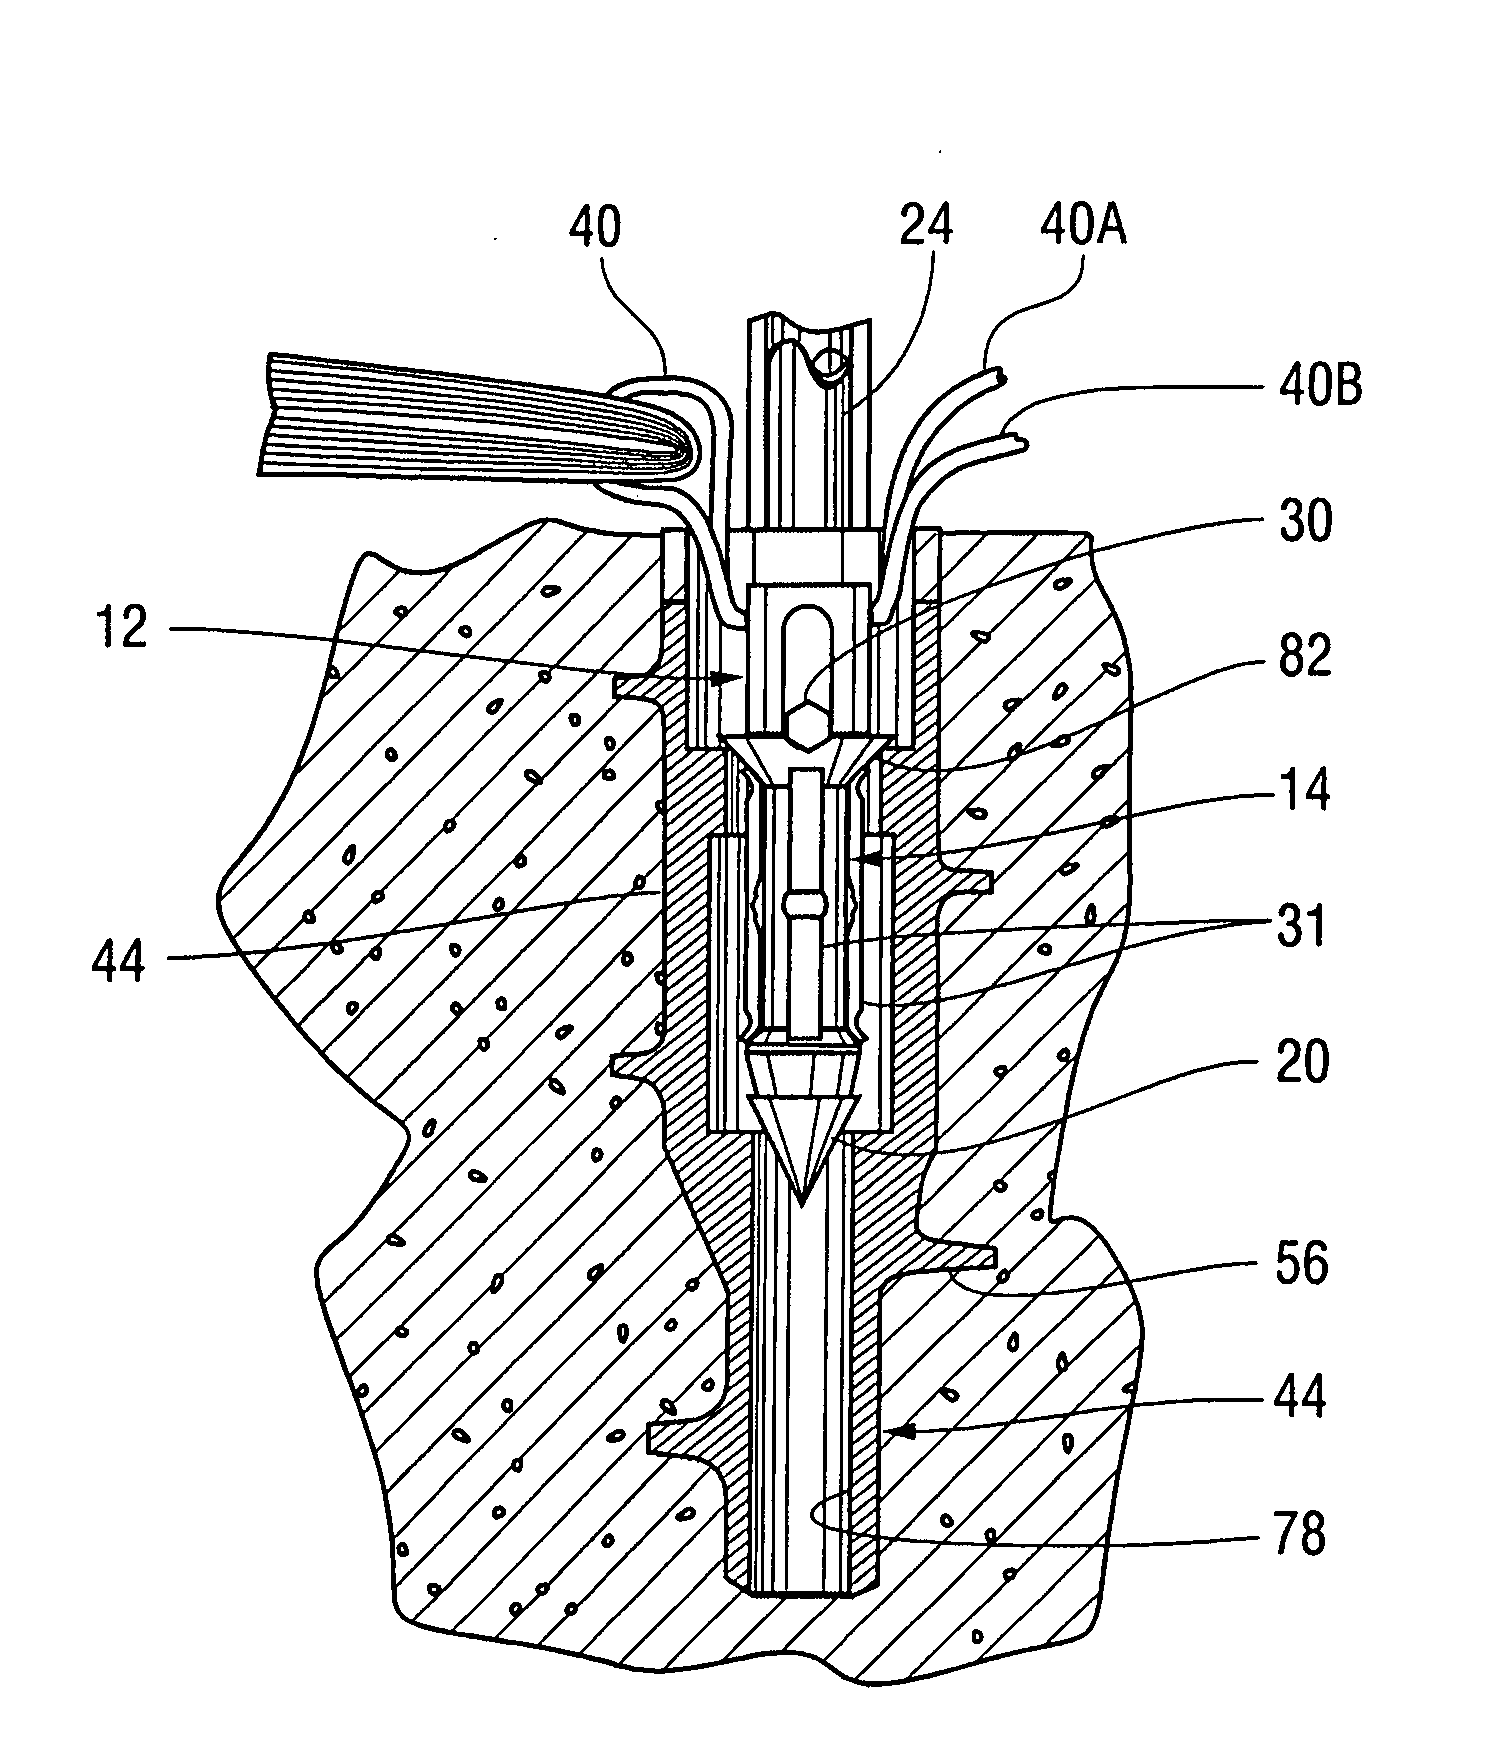 Knotless suture anchor and receptacle combination